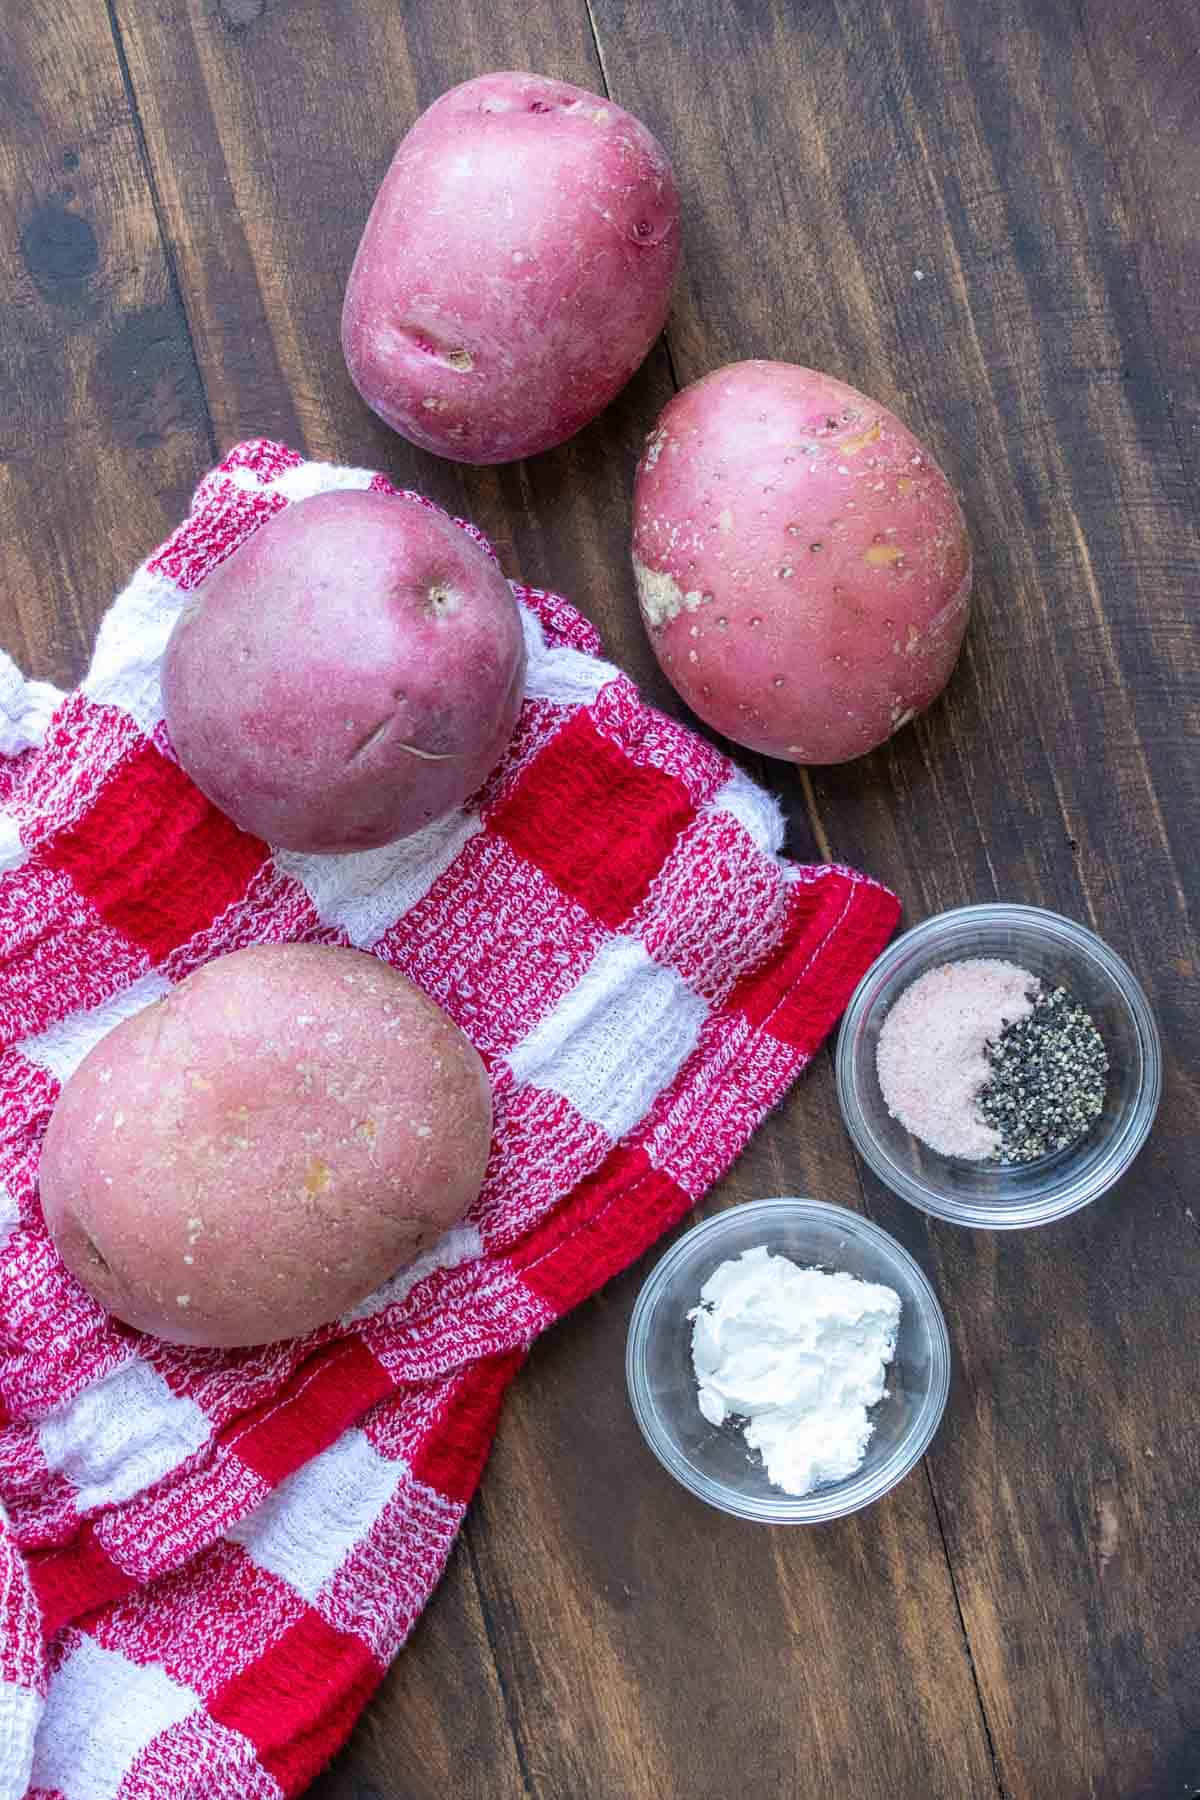 Four red potatoes on a red and white checkered towel next to small bowls of salt and pepper and cornstarch.